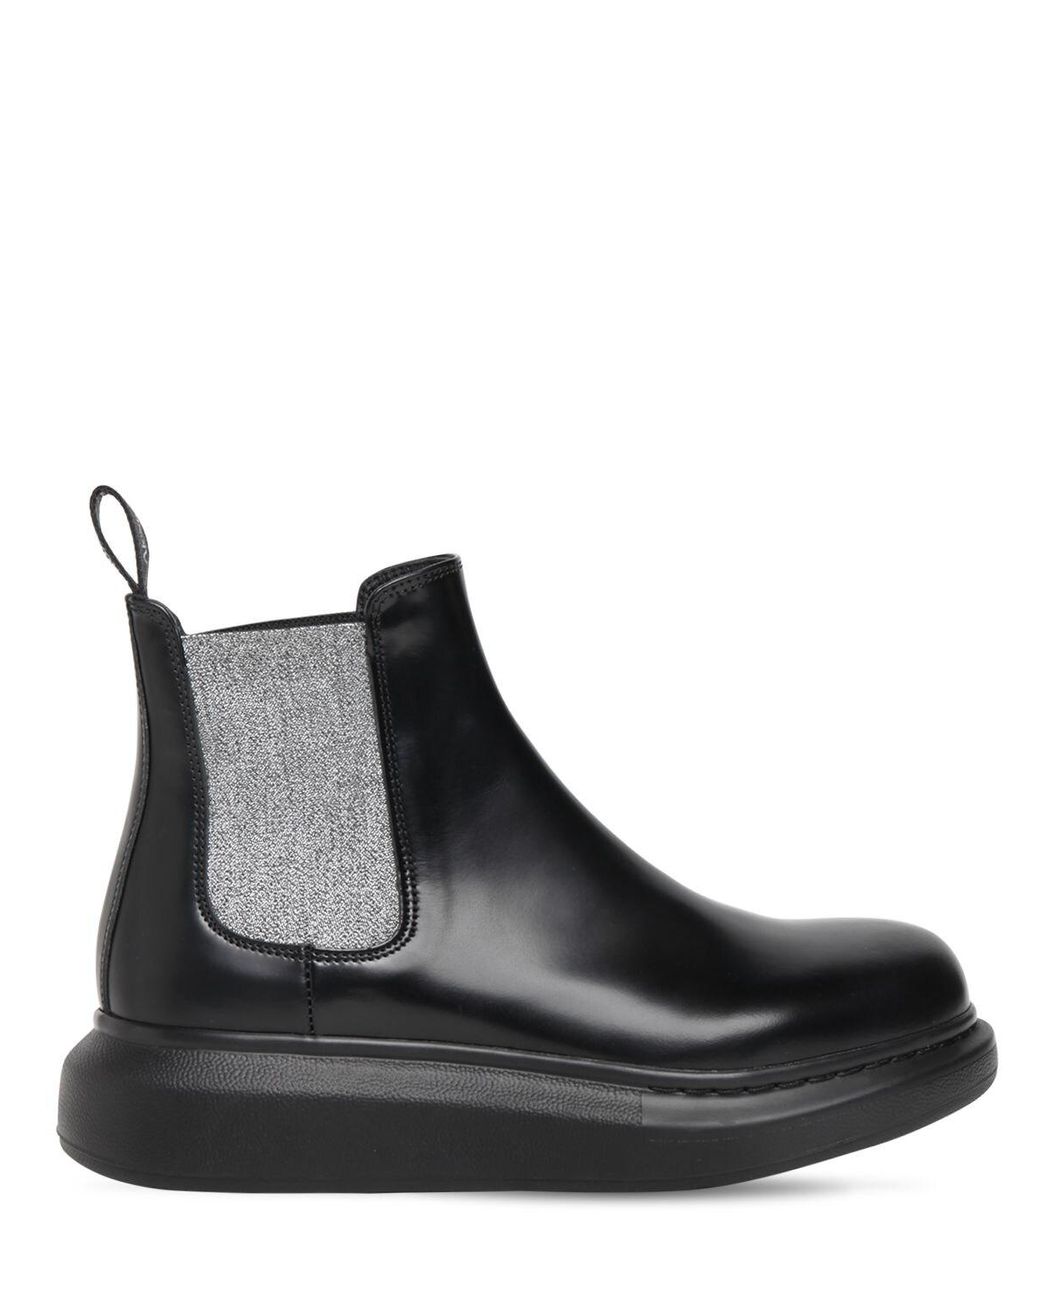 Alexander McQueen 45mm Hybrid Leather Chelsea Boots in Black/Silver ...